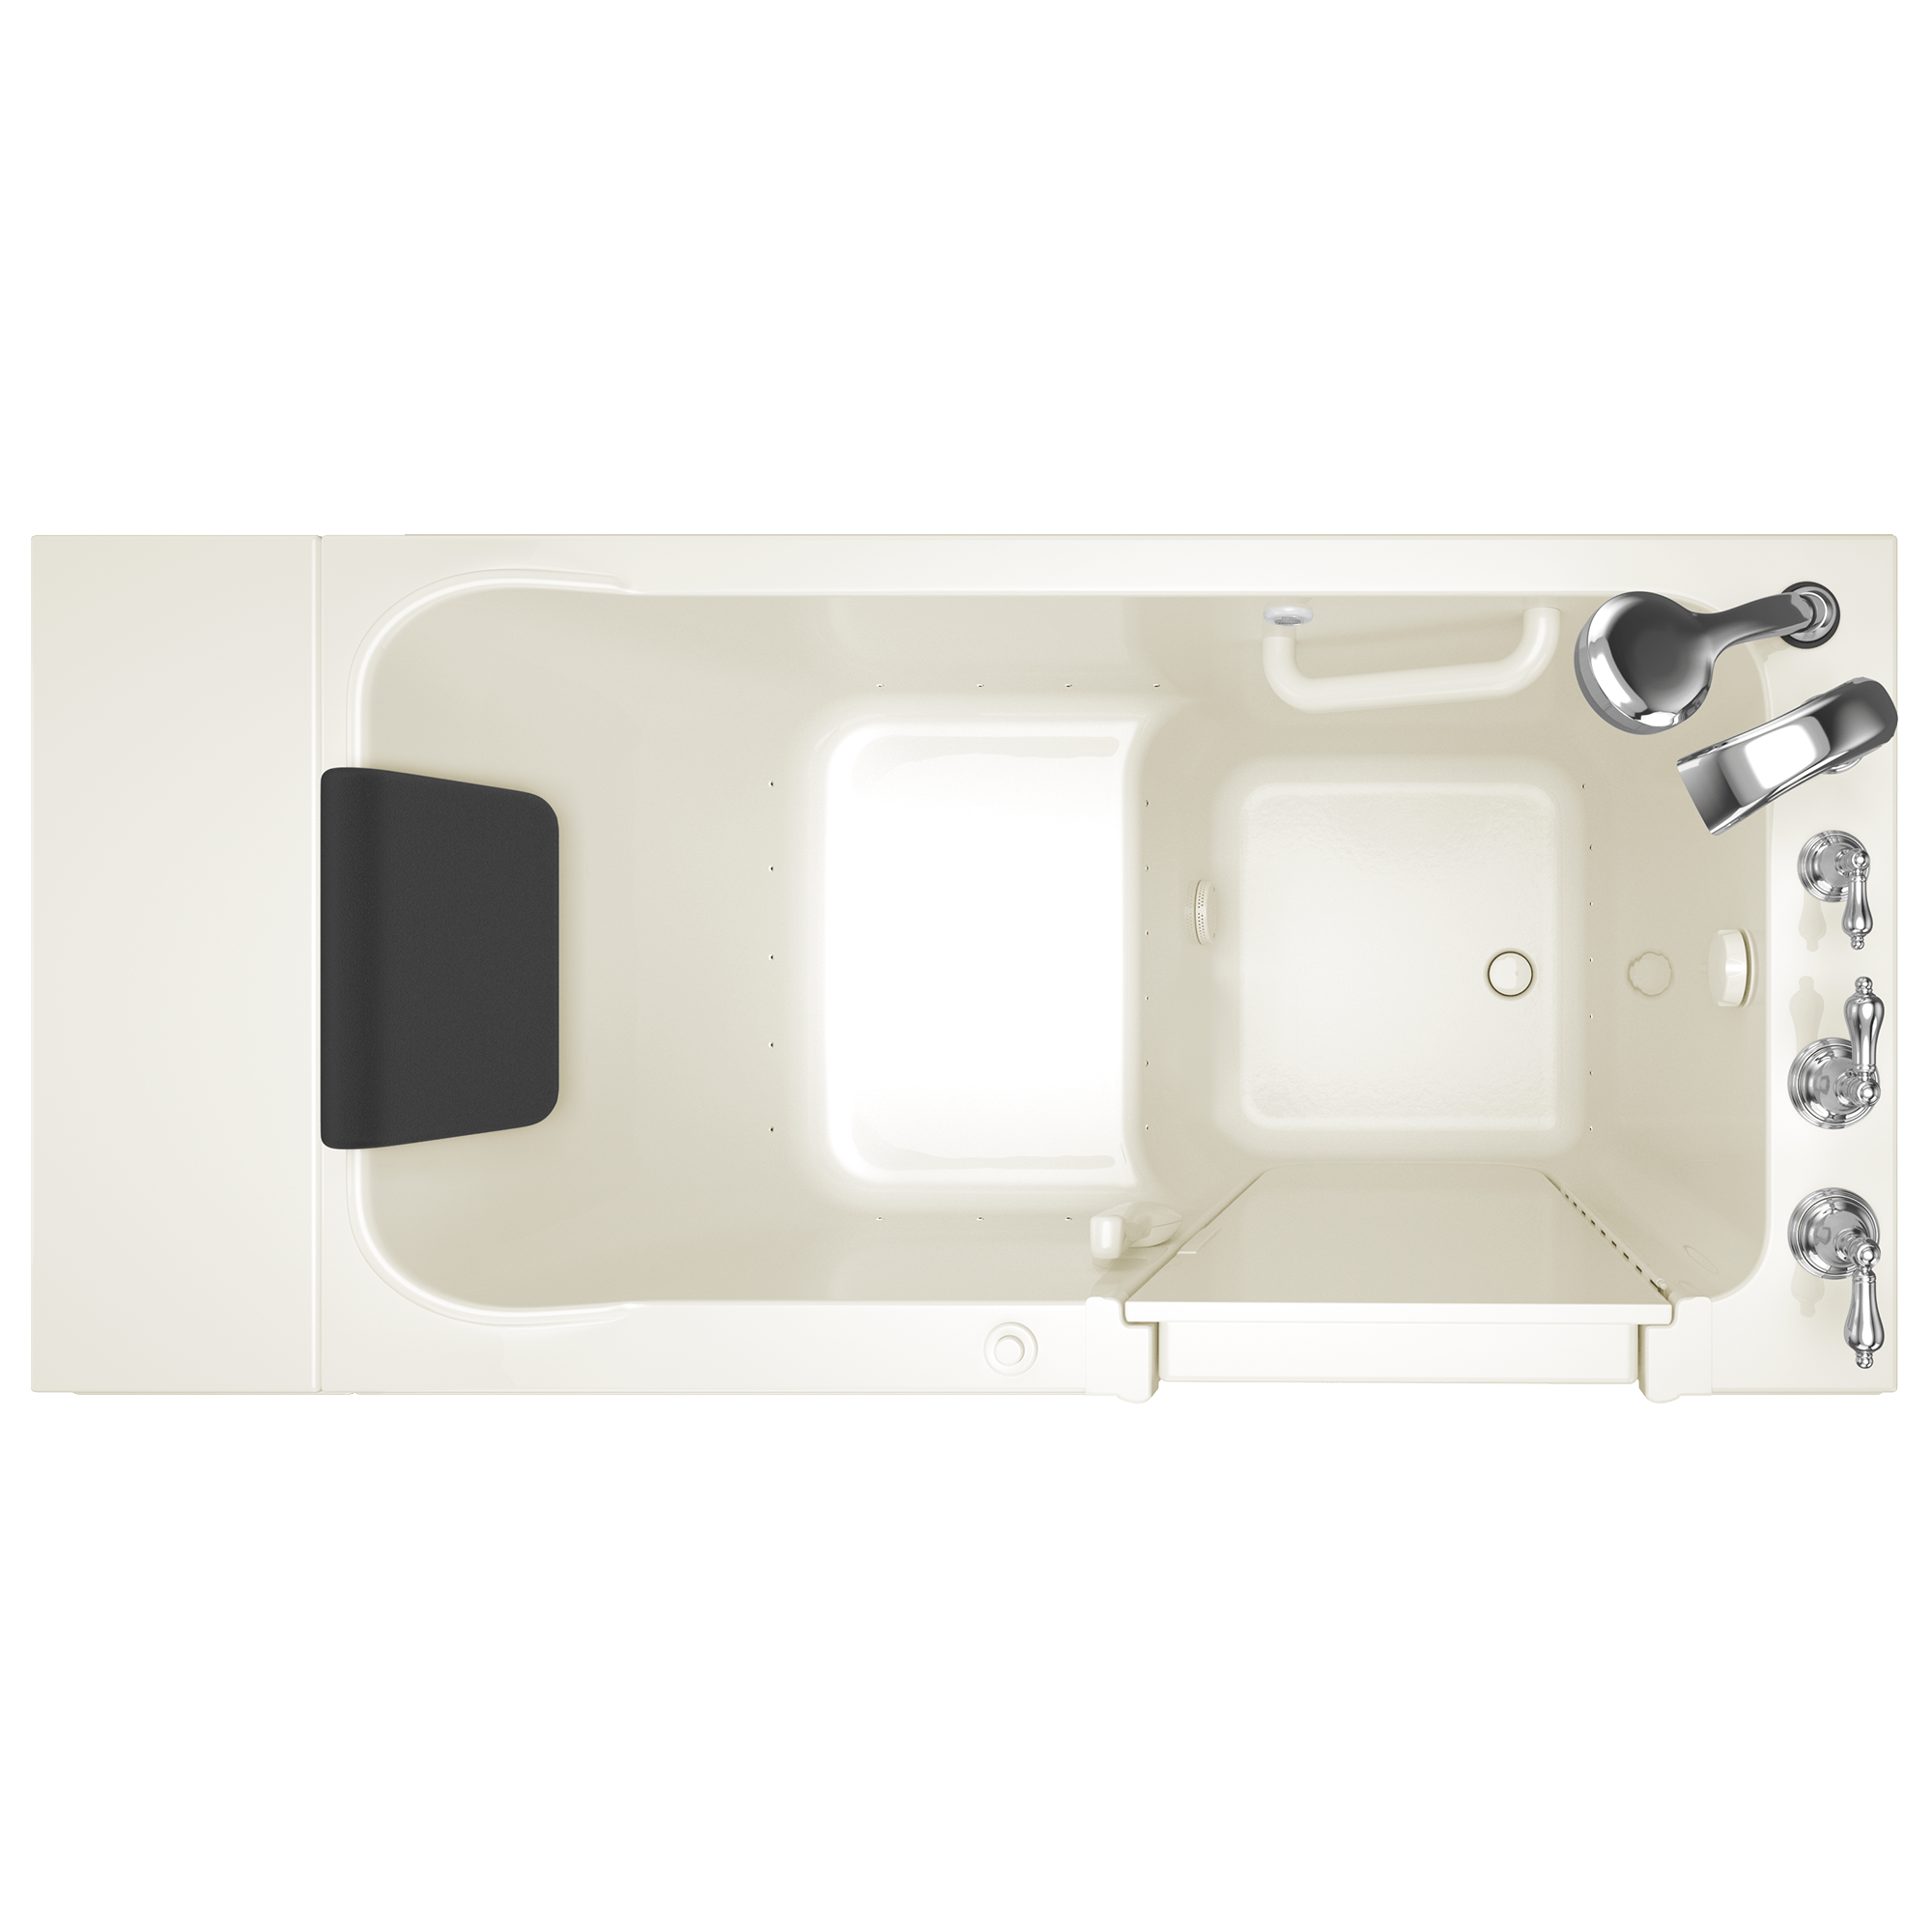 Acrylic Luxury Series 28 x 48 Inch Walk in Tub With Air Spa System   Right Hand Drain With Faucet WIB LINEN